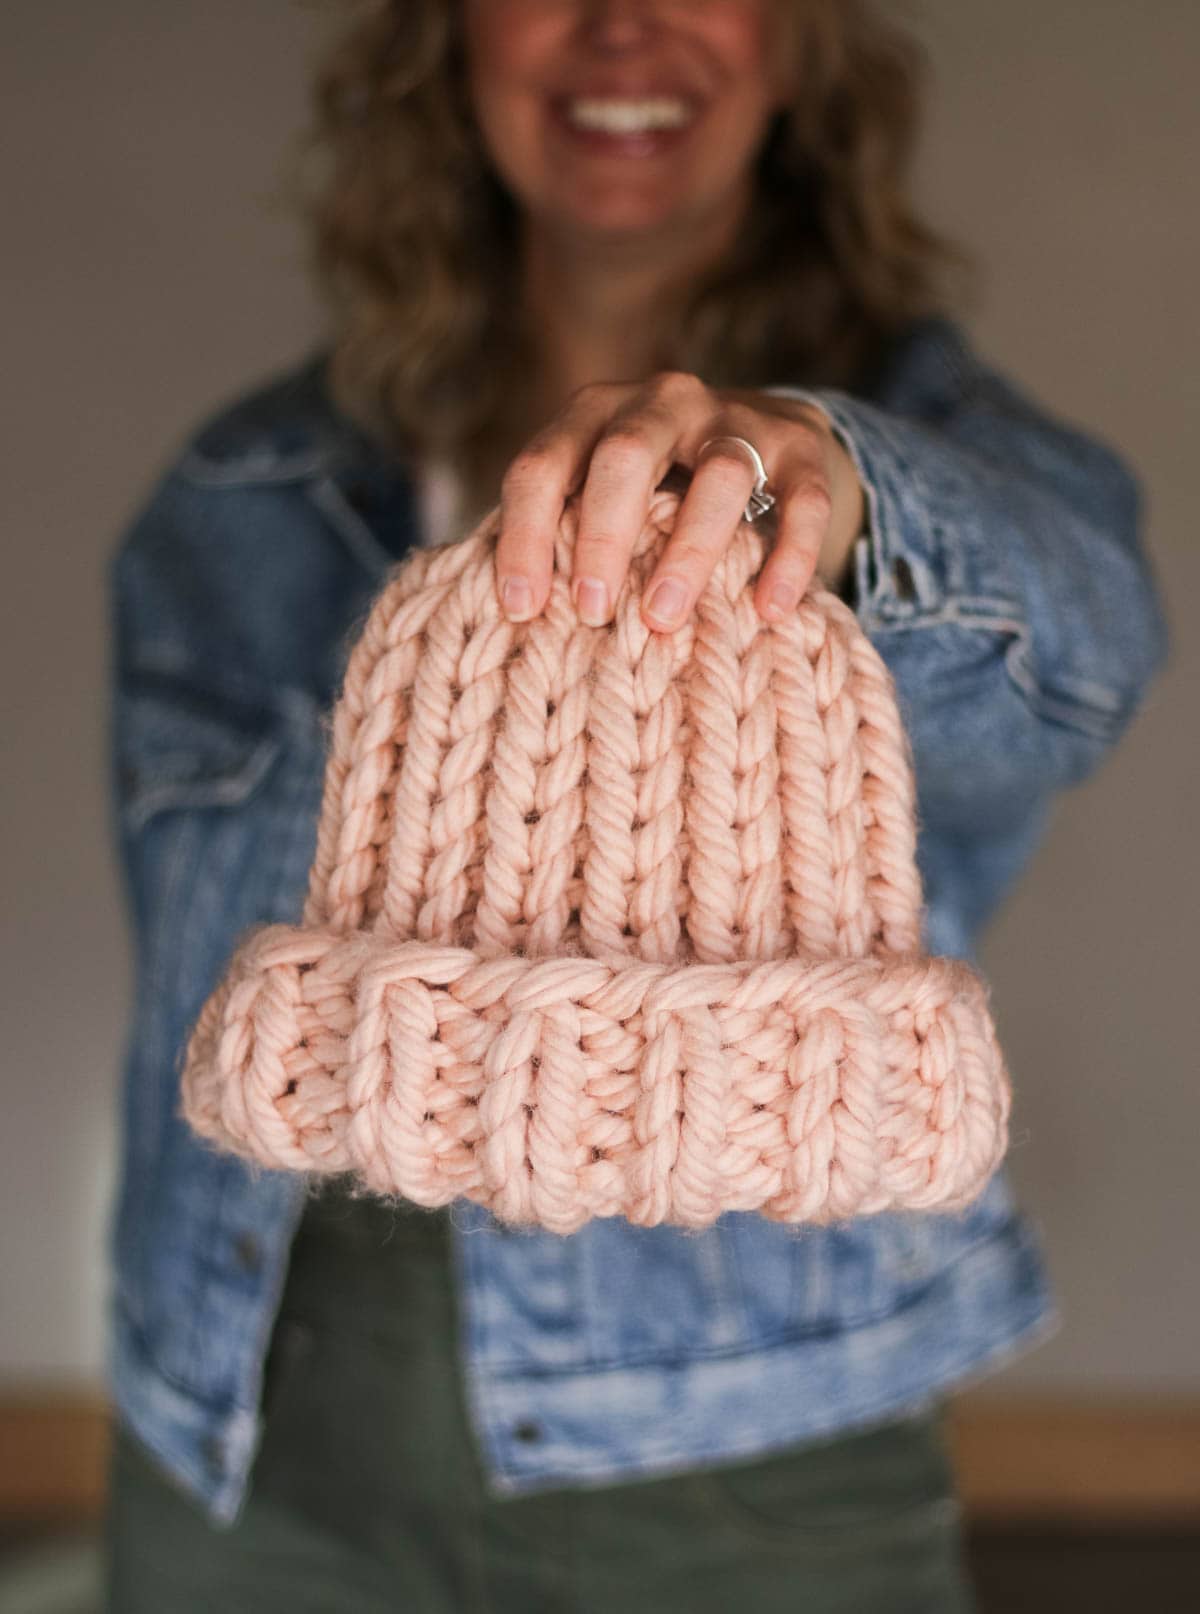 A knit ribbed hat made with chunky pink yarn.